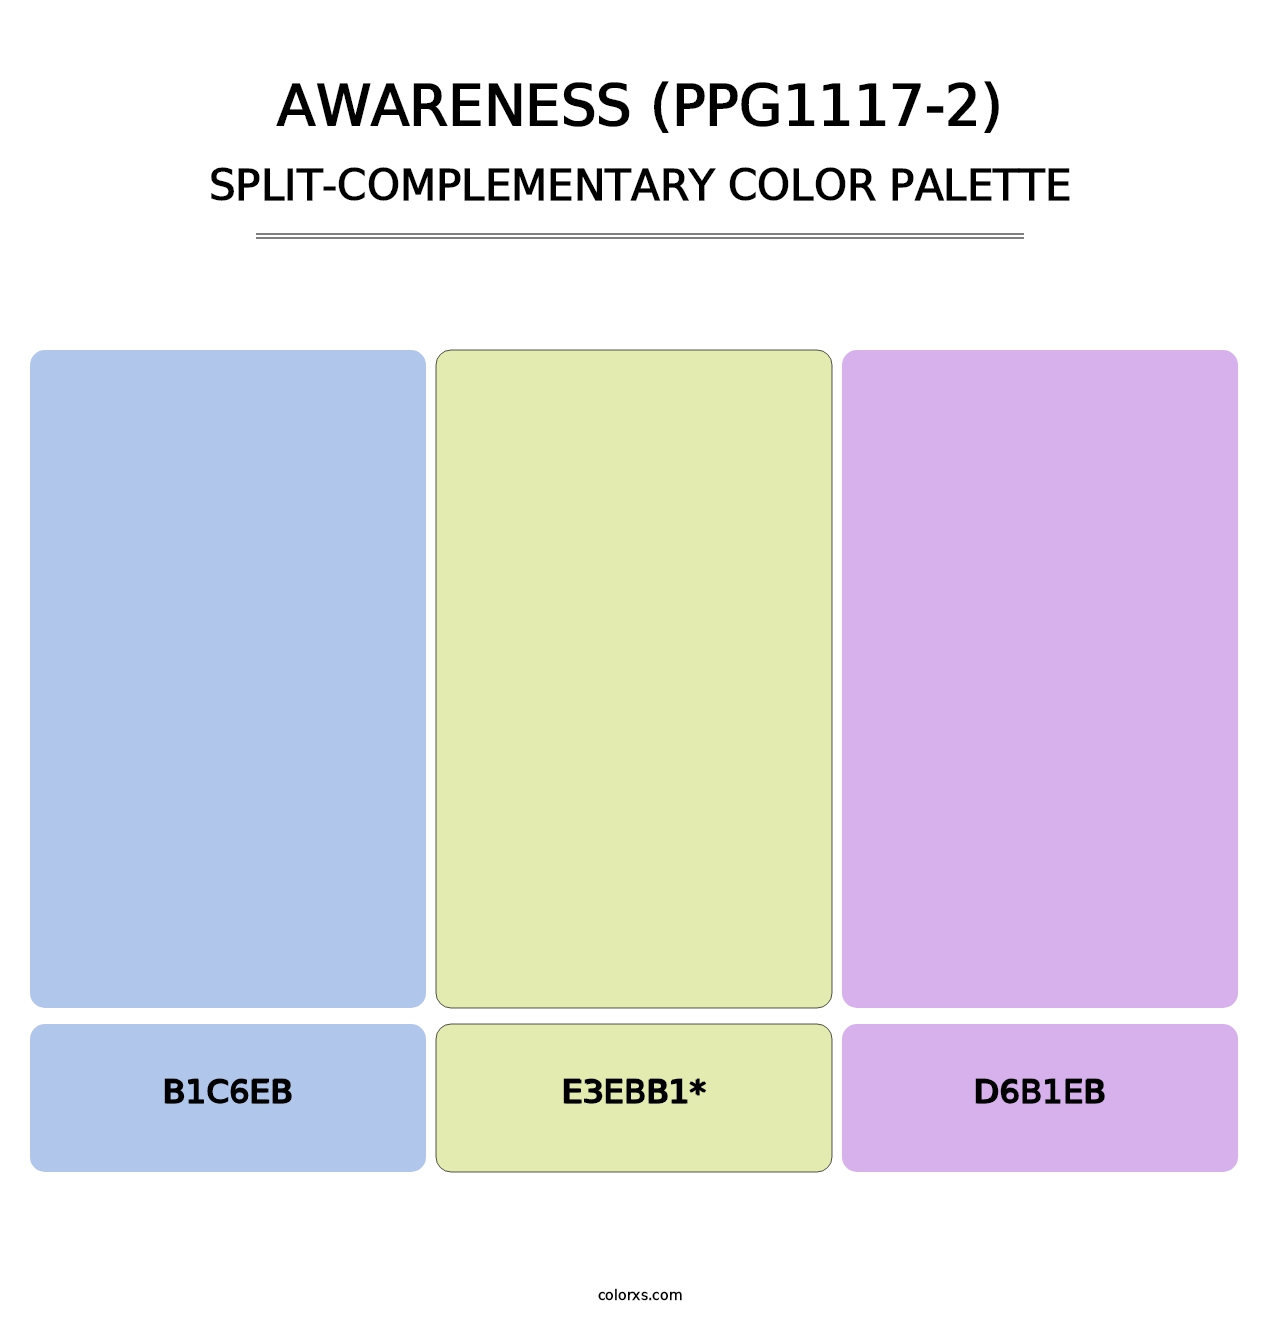 Awareness (PPG1117-2) - Split-Complementary Color Palette